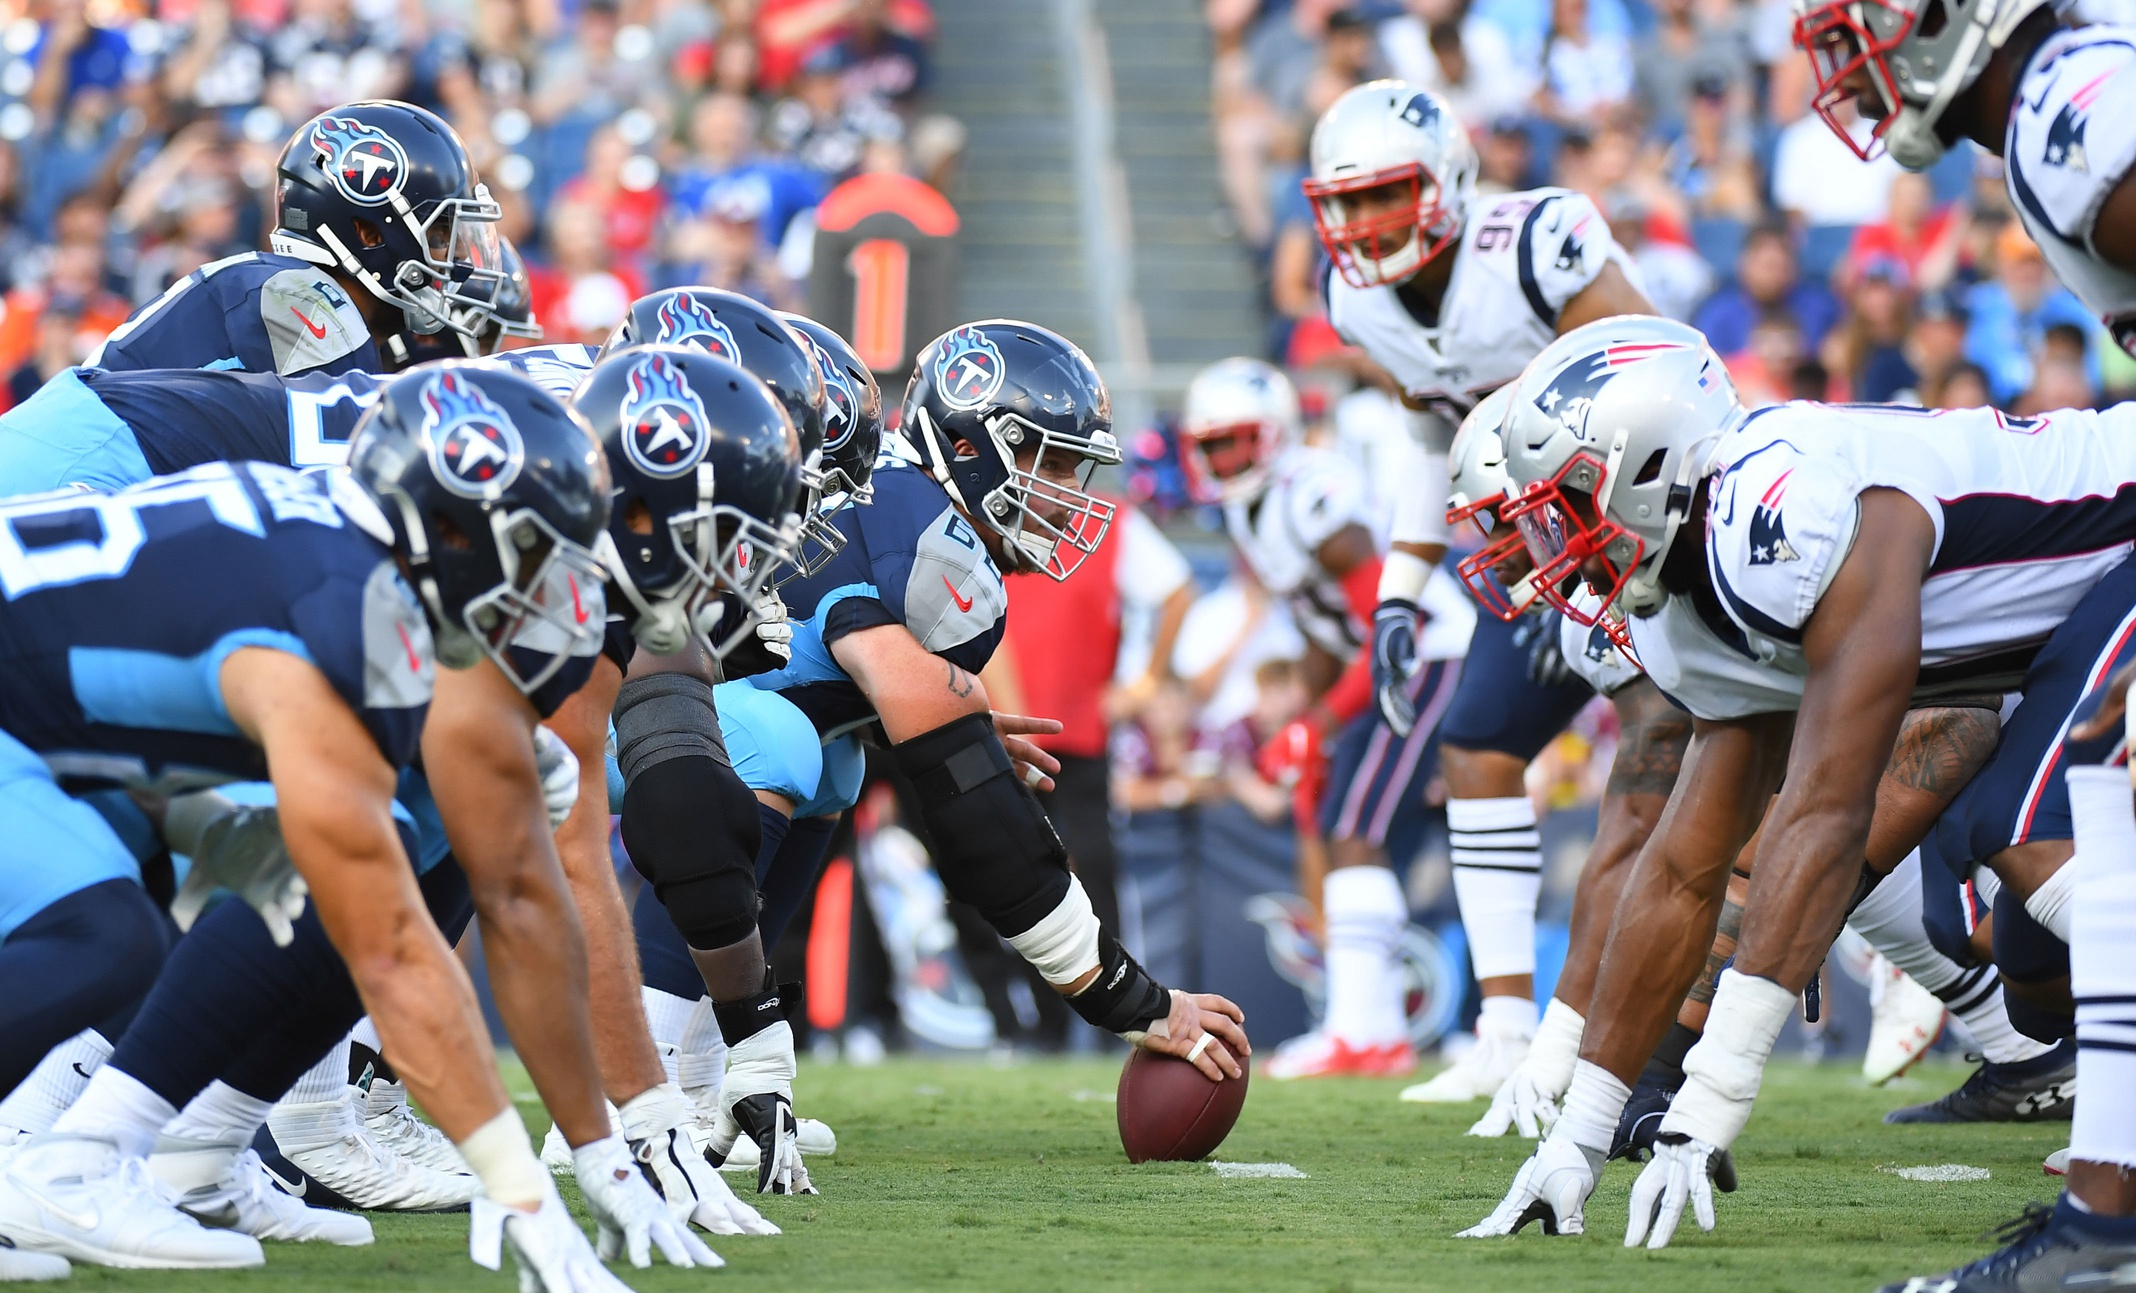 https://images.saymedia-content.com/.image/MTY5NDkyMjc0MDAwOTYyODQ5/titans-patriotslineofscrimmage.jpg